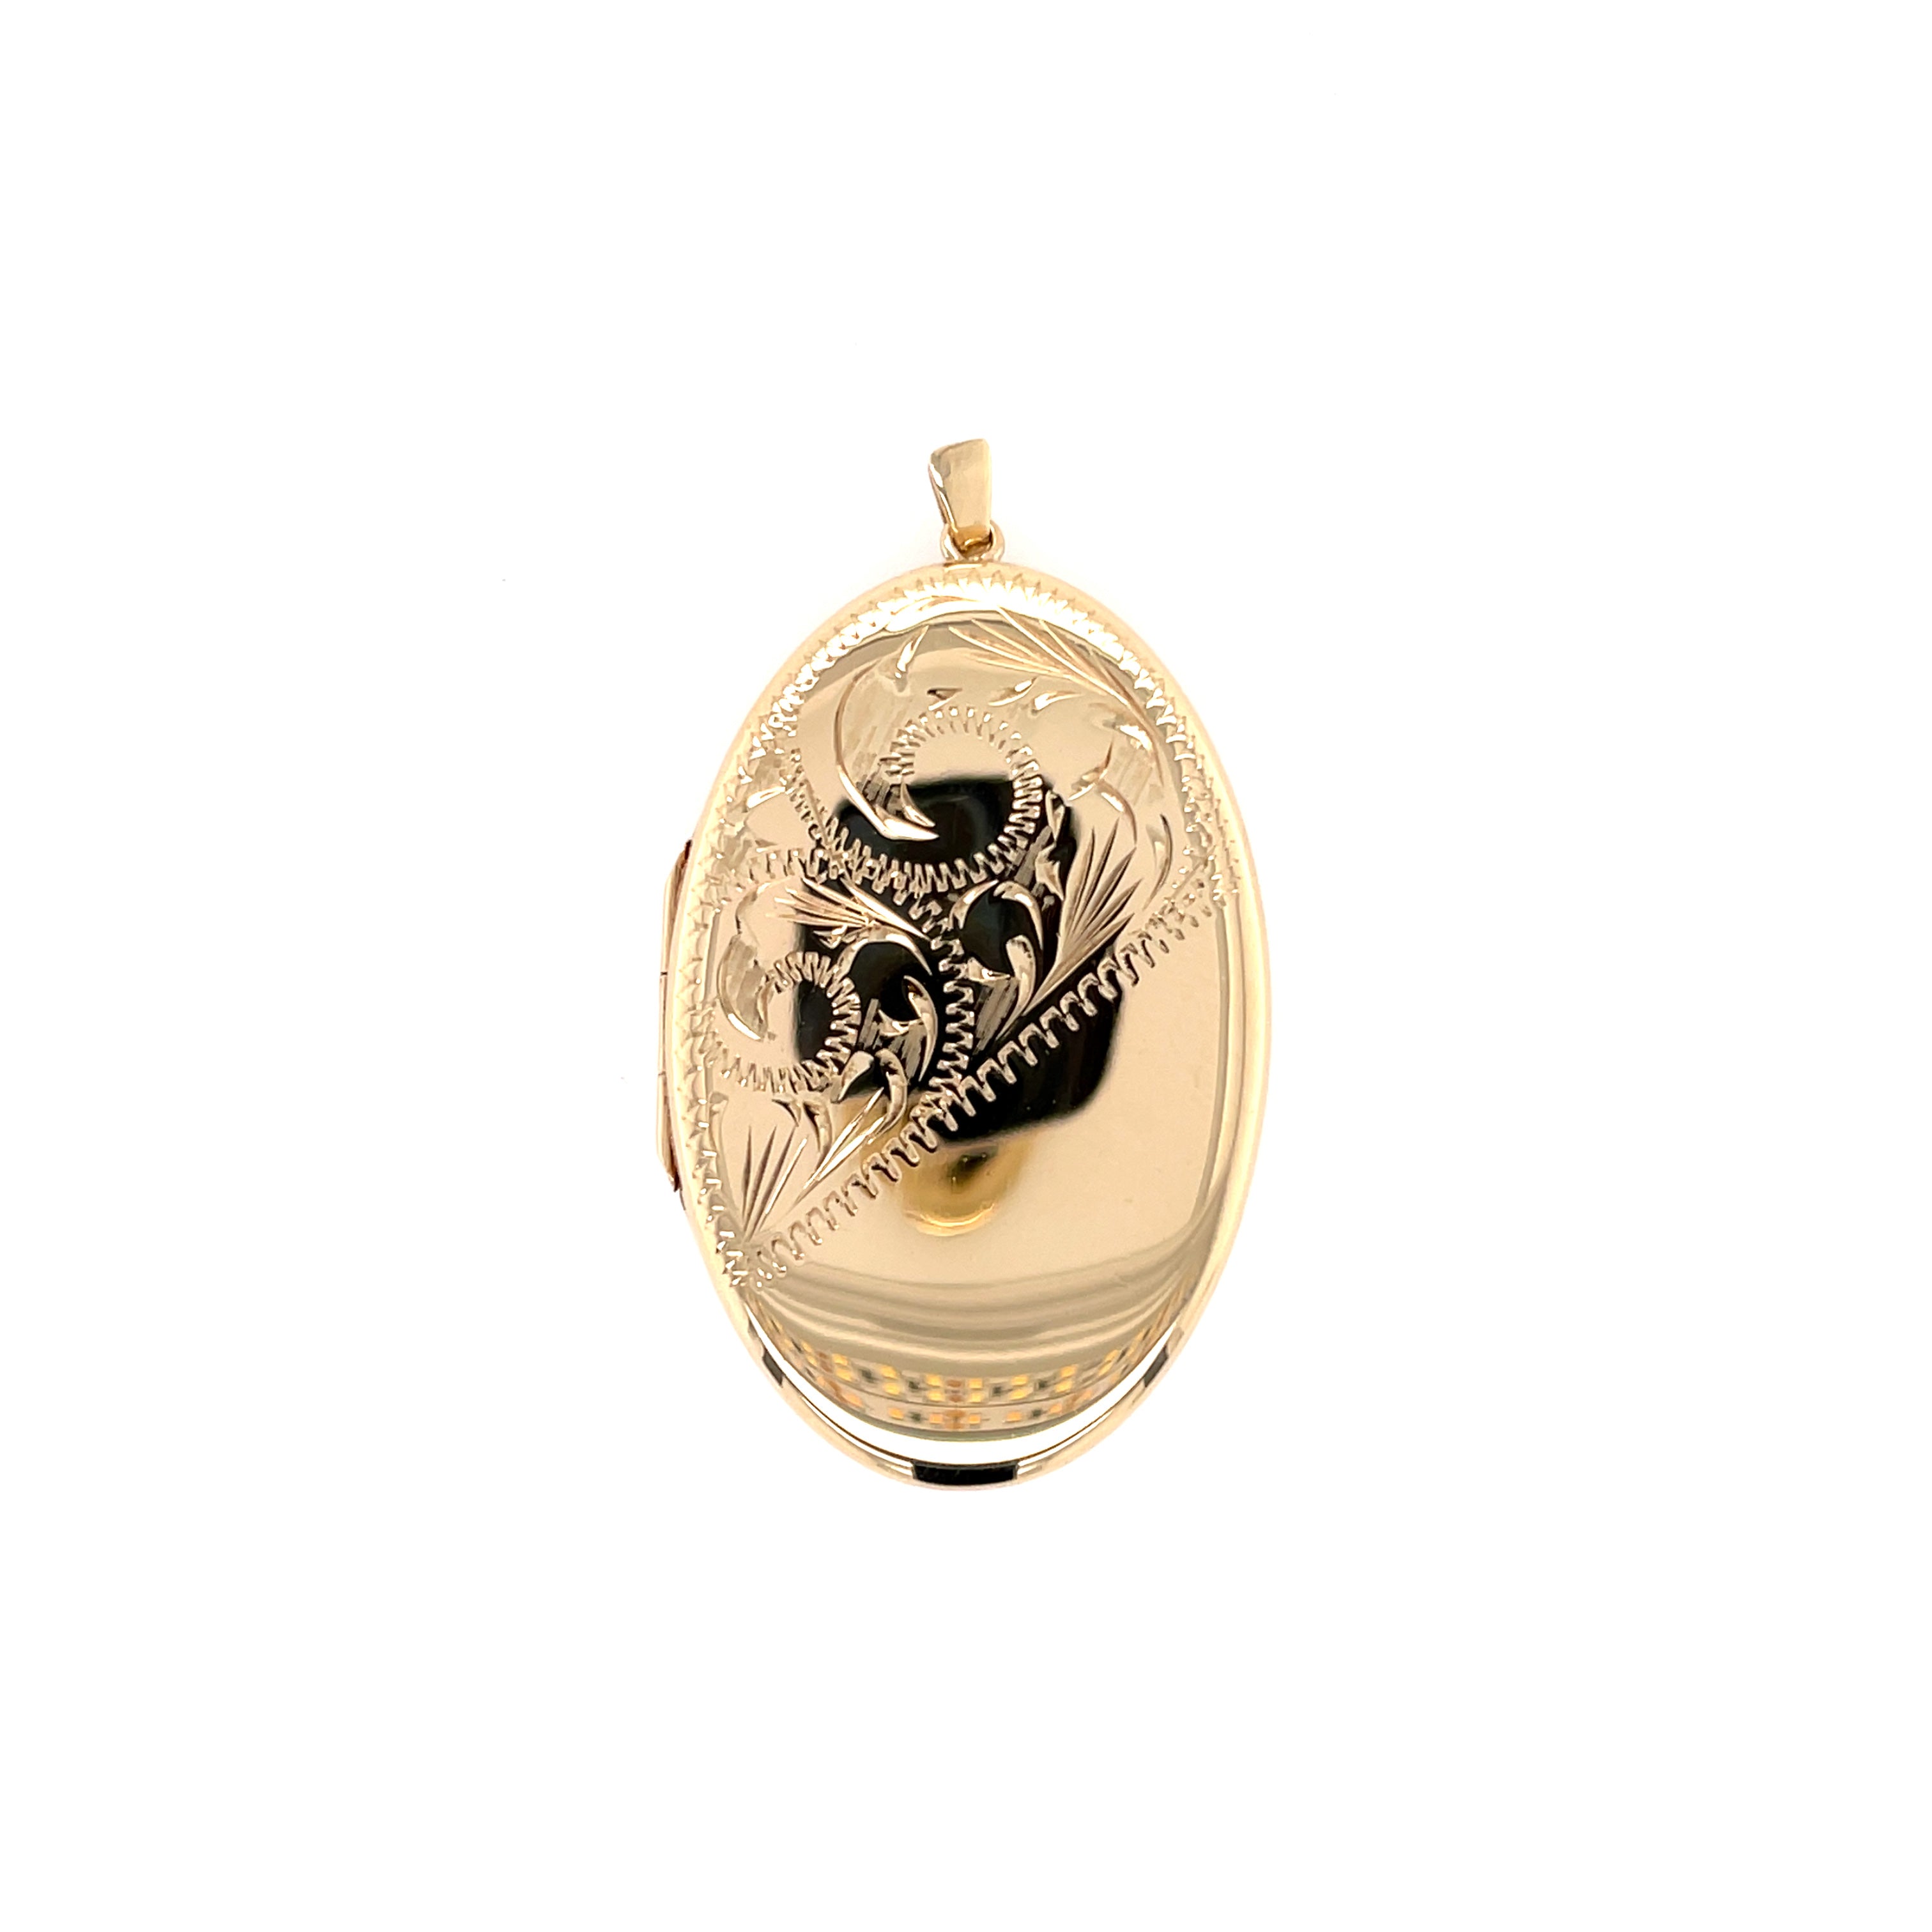 9ct Yellow Gold Oval Engraved Locket Pendant - 12.35g SOLD